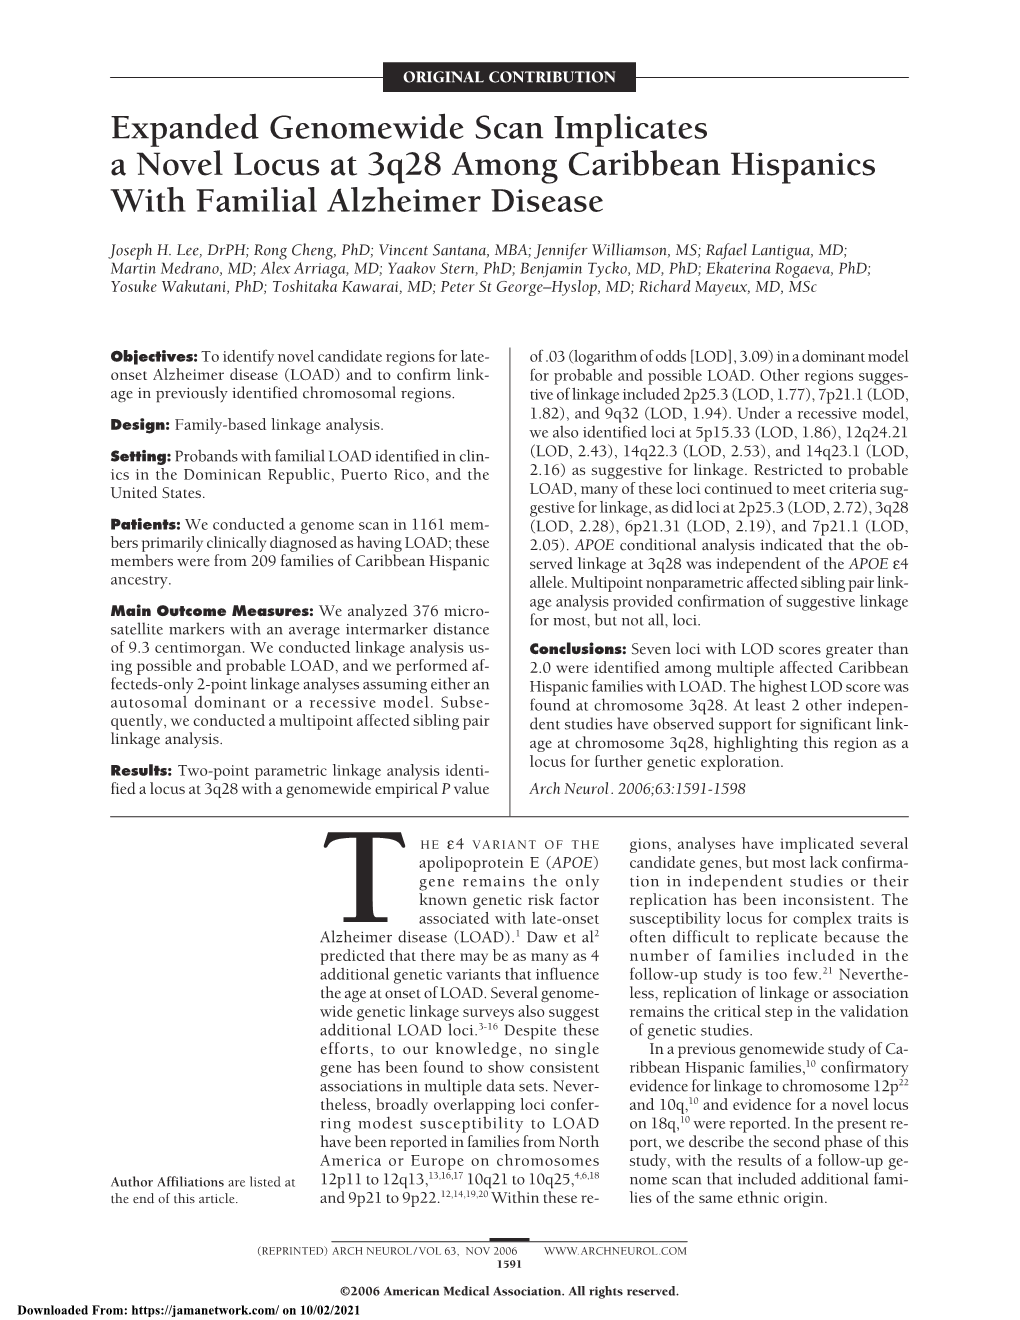 Expanded Genomewide Scan Implicates a Novel Locus at 3Q28 Among Caribbean Hispanics with Familial Alzheimer Disease